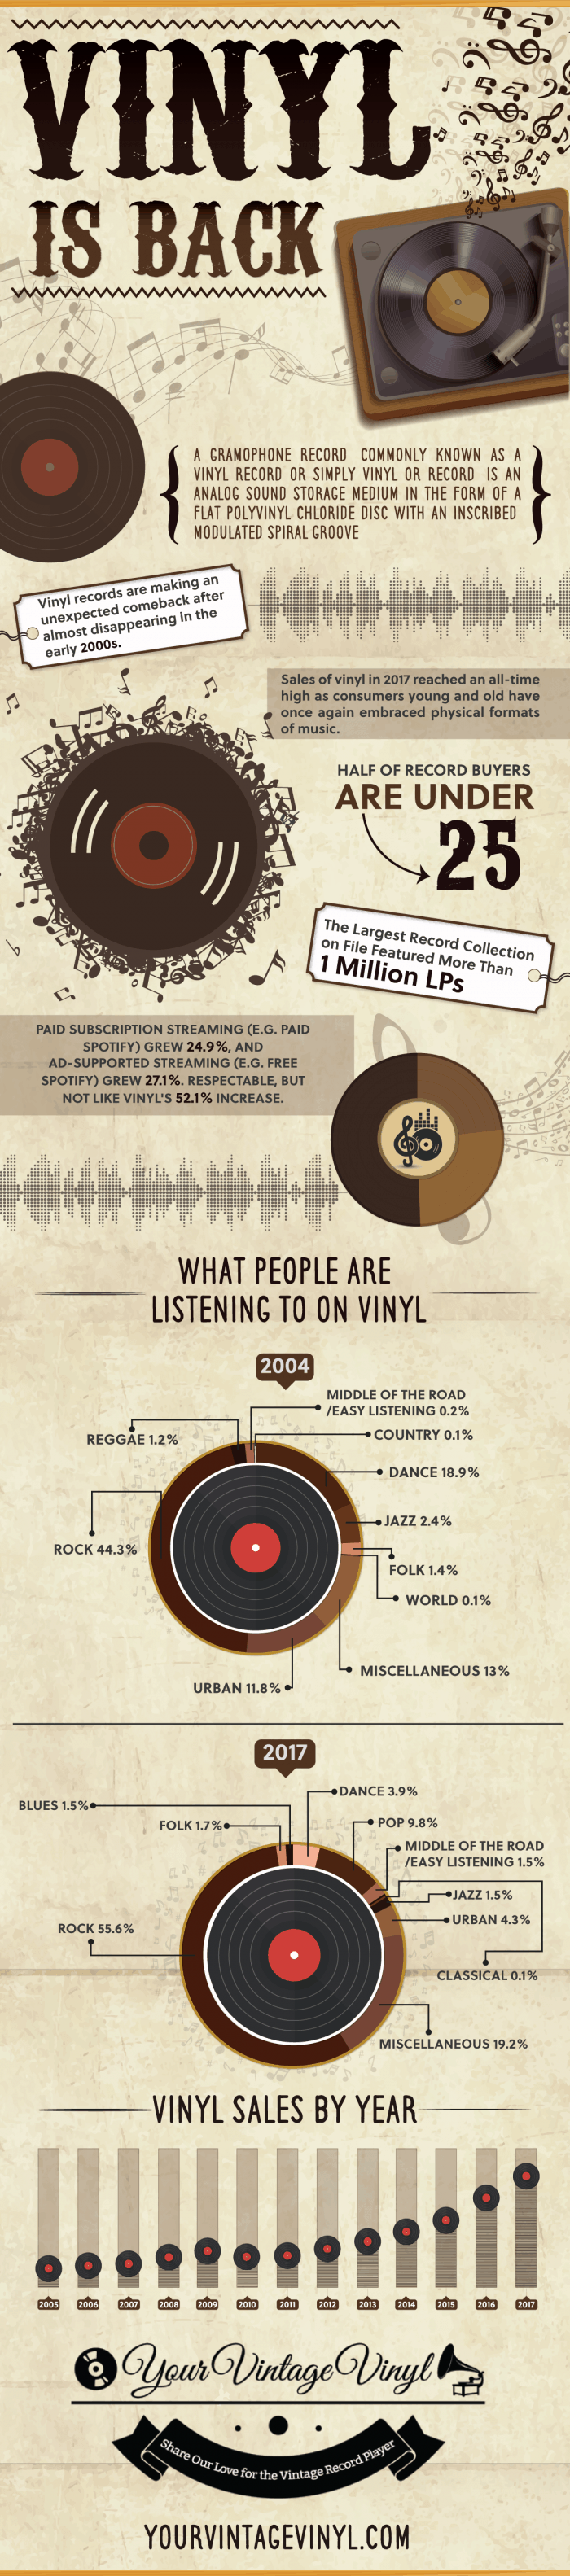 Infographic about the comeback of the vinyl records.